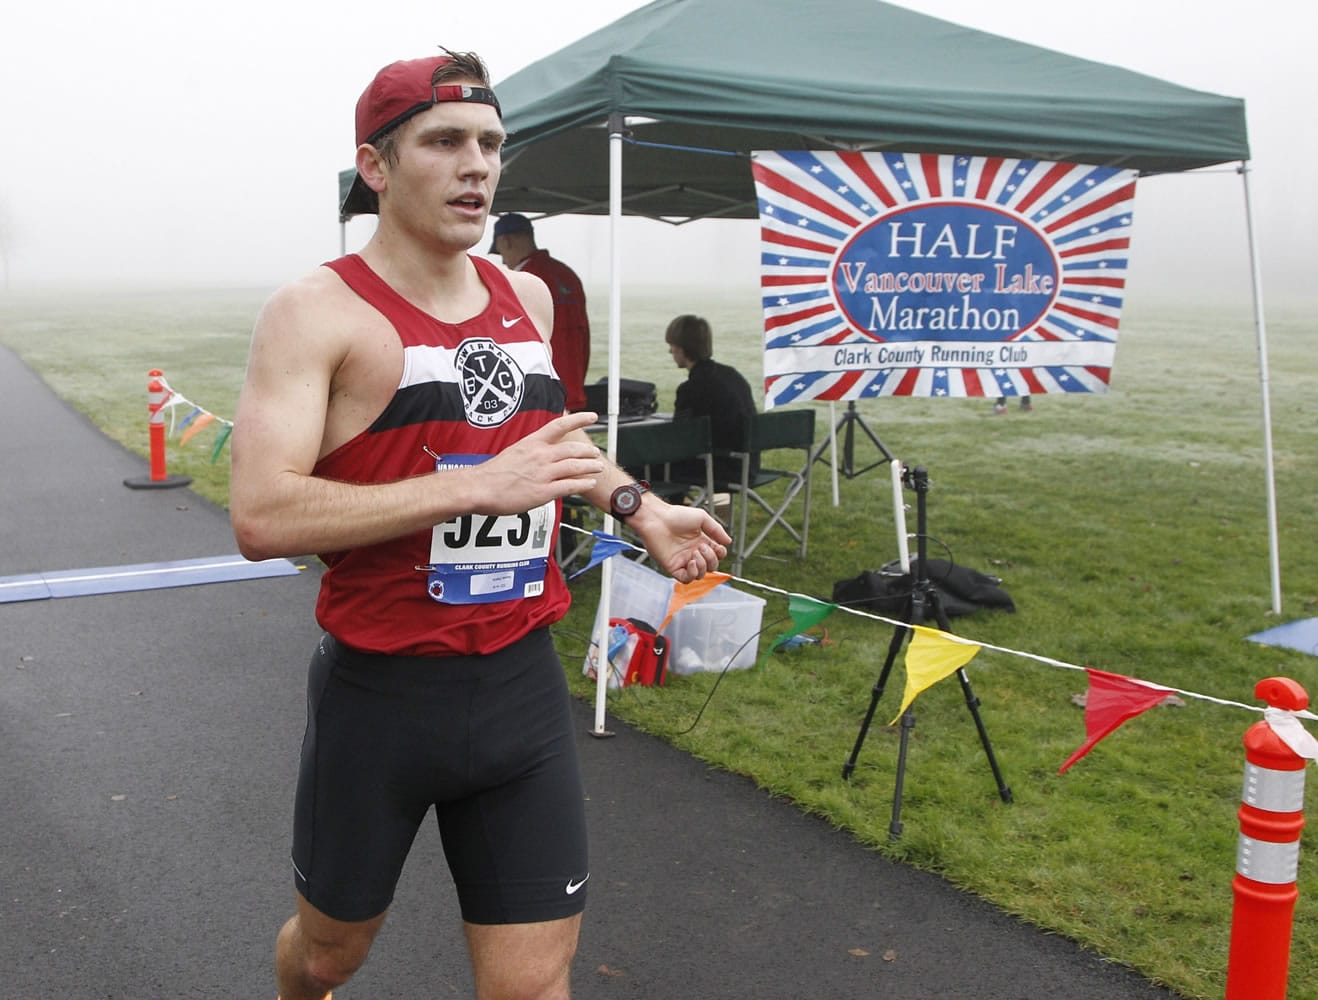 Patrick Reaves was the men's winner of the Vancouver Lake Half Marathon on Sunday, Jan. 25, 2015. He finished with a time of 1 hour, 10 minutes, 57 seconds.